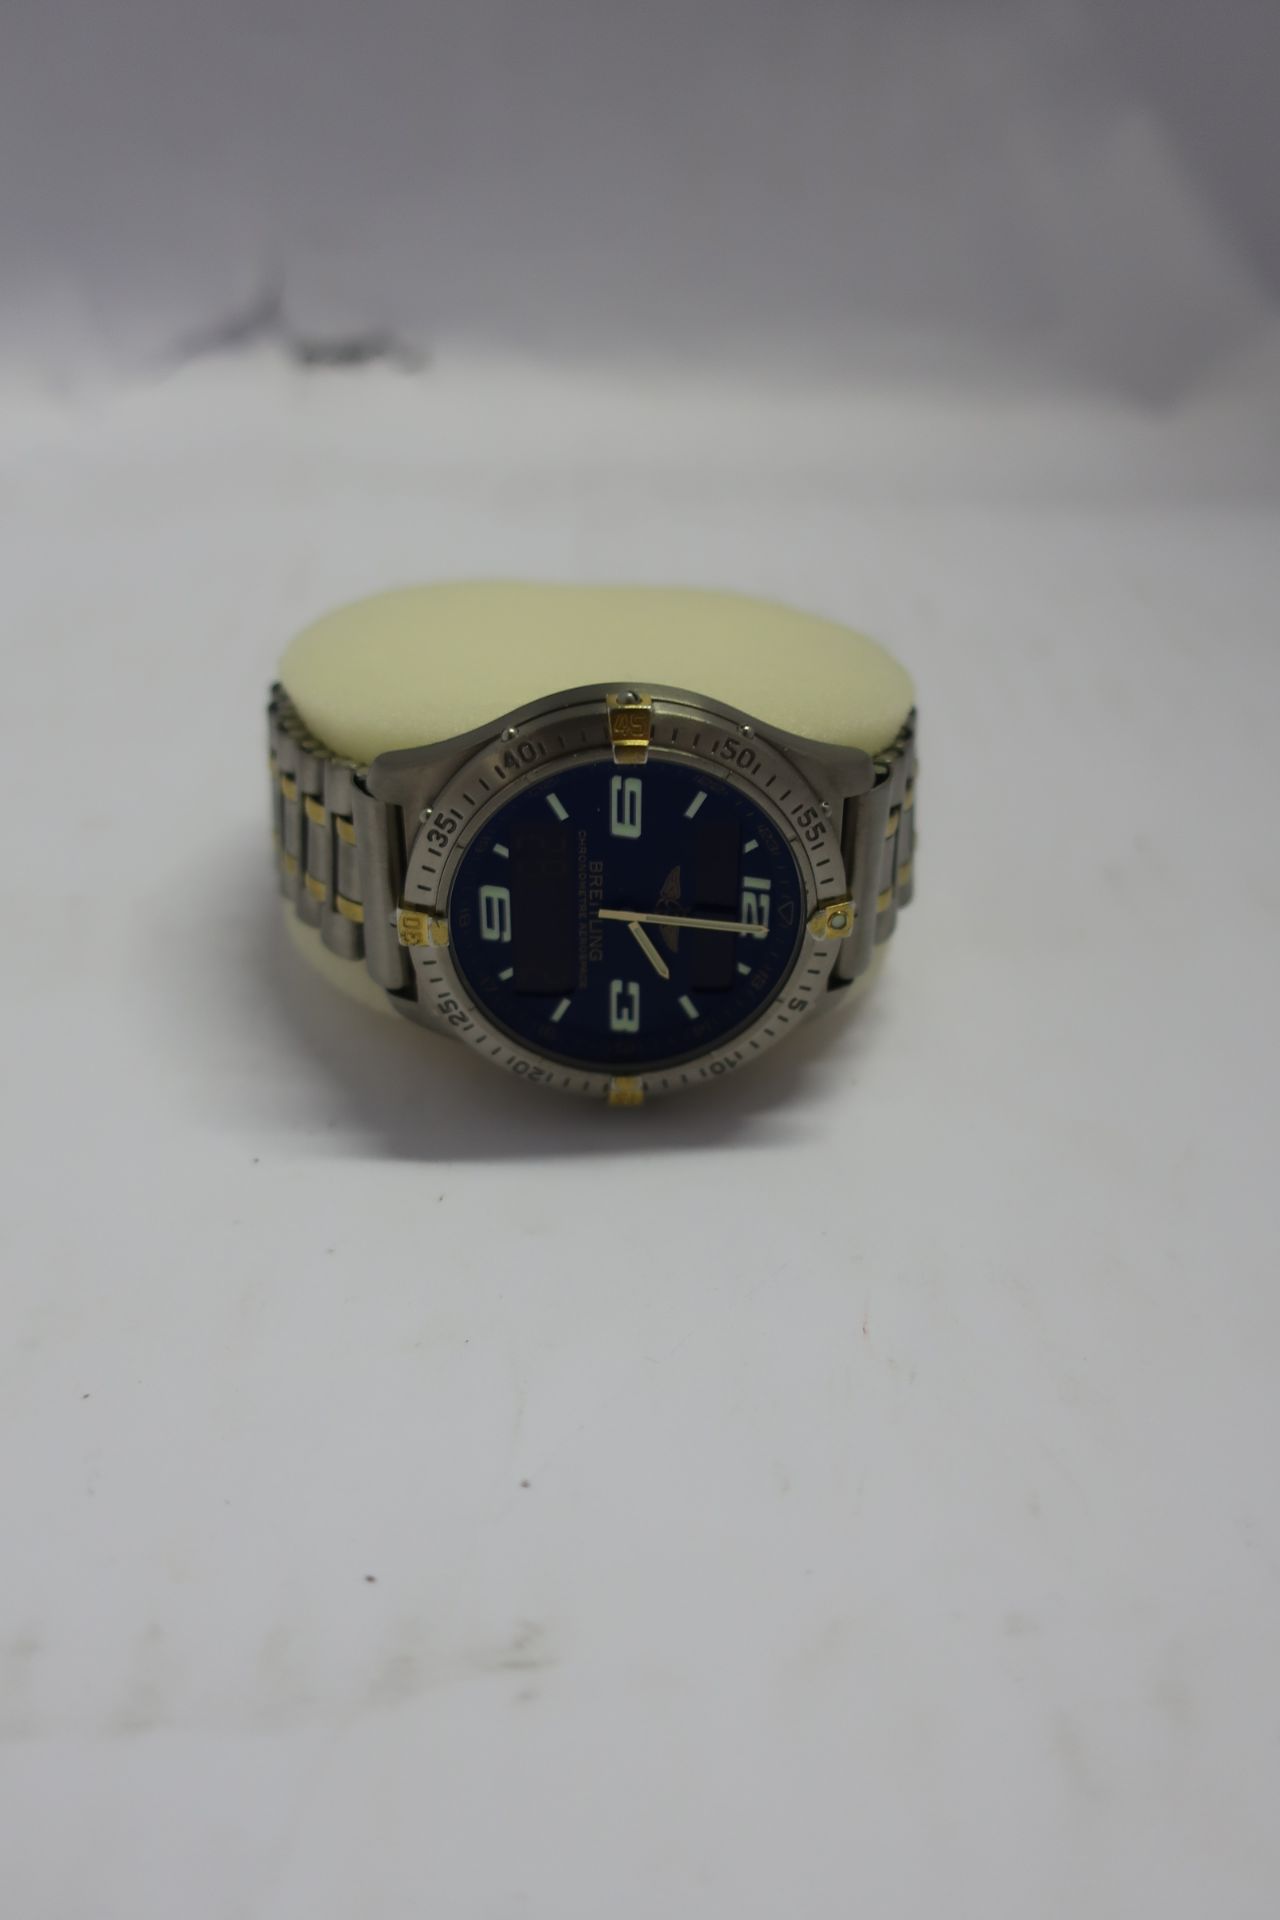 One man's pre-owned Breitling Aerospace chronometer quartz watch (Recently repaired/serviced). - Image 2 of 4